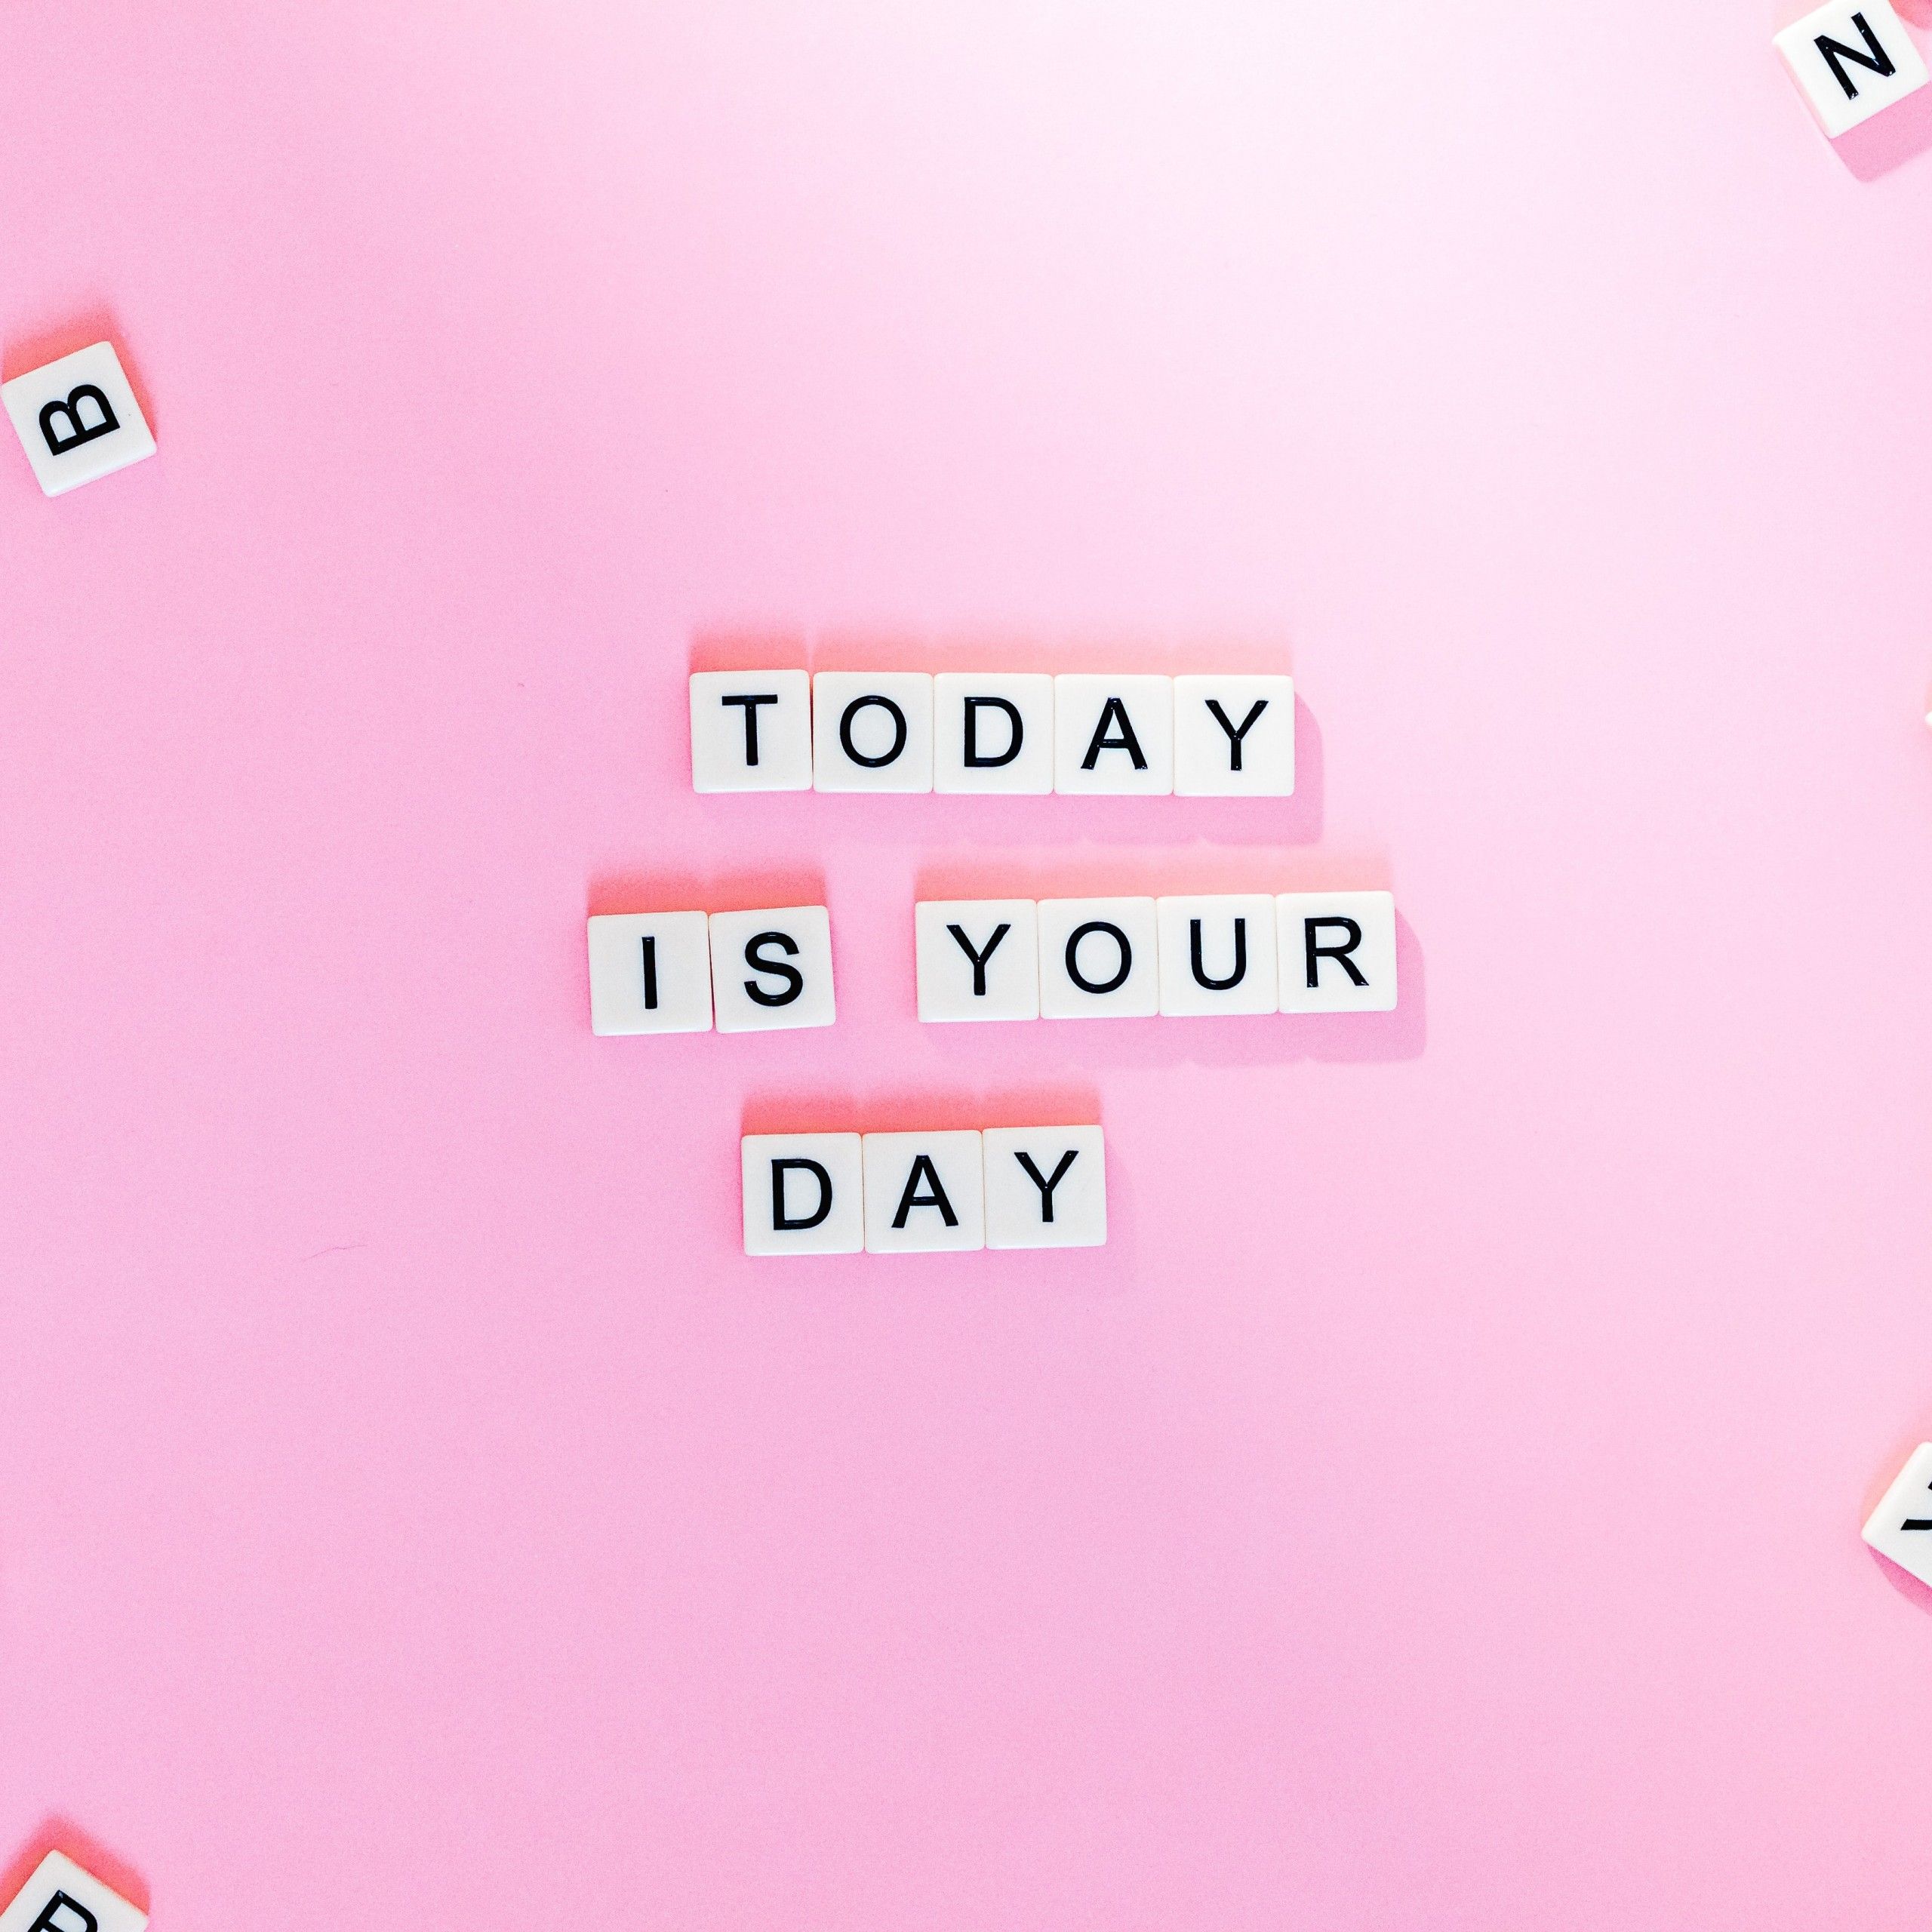 Today is Your Day 4K Wallpaper, Pink background, Letters, Girly, Motivational, Popular quotes, Aesthetic, Quotes